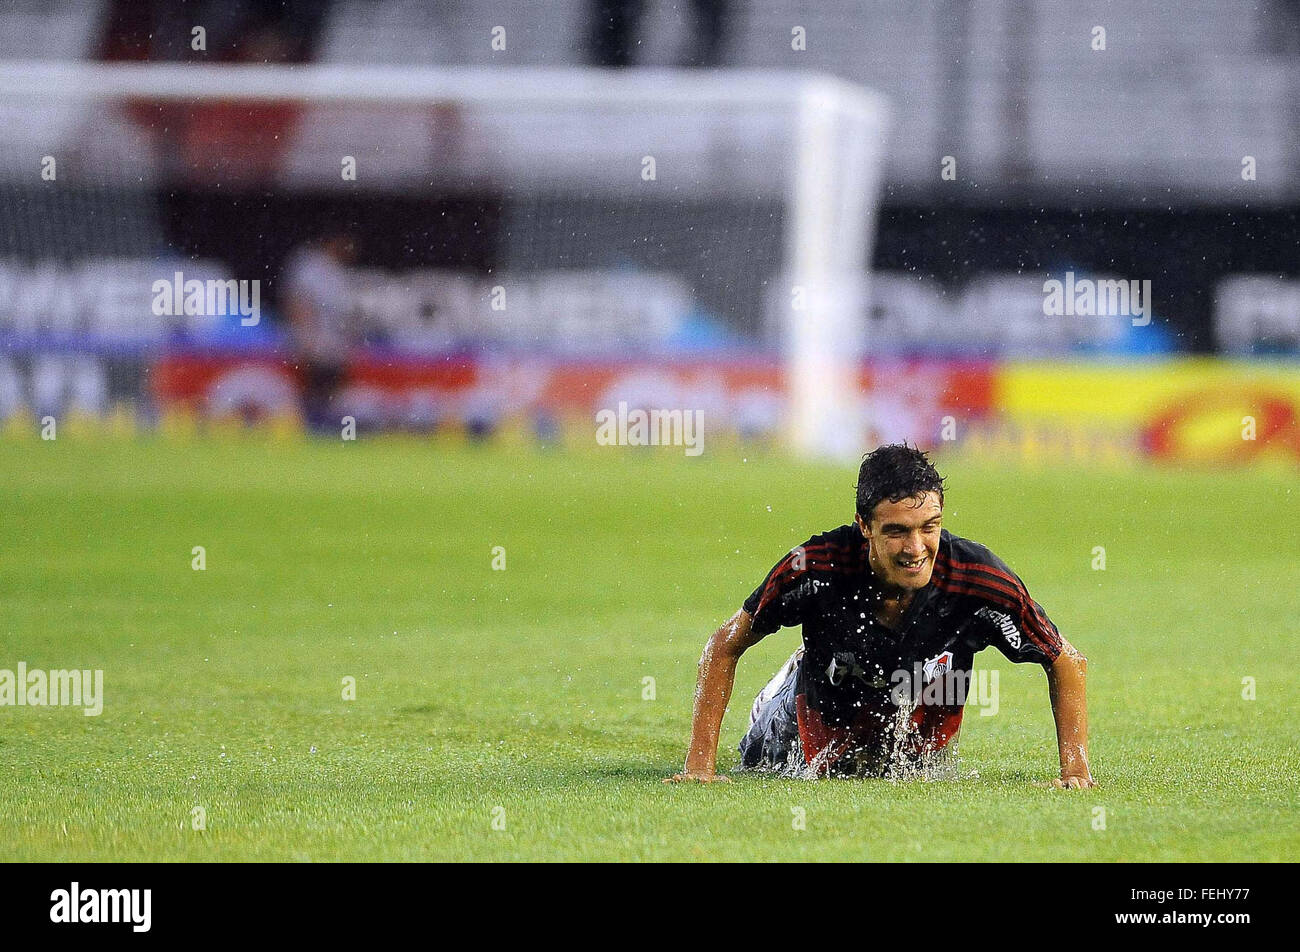 Buenos Aires, Argentina. 7th Feb, 2016. A fan gets in to the playing field before the suspension of the match of the Tornament First Division between River Plate and Quilmes, held at the Antonio Vespuci Monumental Stadium, in the city of Buenos Aires, capital of Argentina, on Feb. 7, 2016. A heavy rain forced the suspension of the match, and it was rescheduled. © Maximiliano Luna/TELAM/Xinhua/Alamy Live News Stock Photo